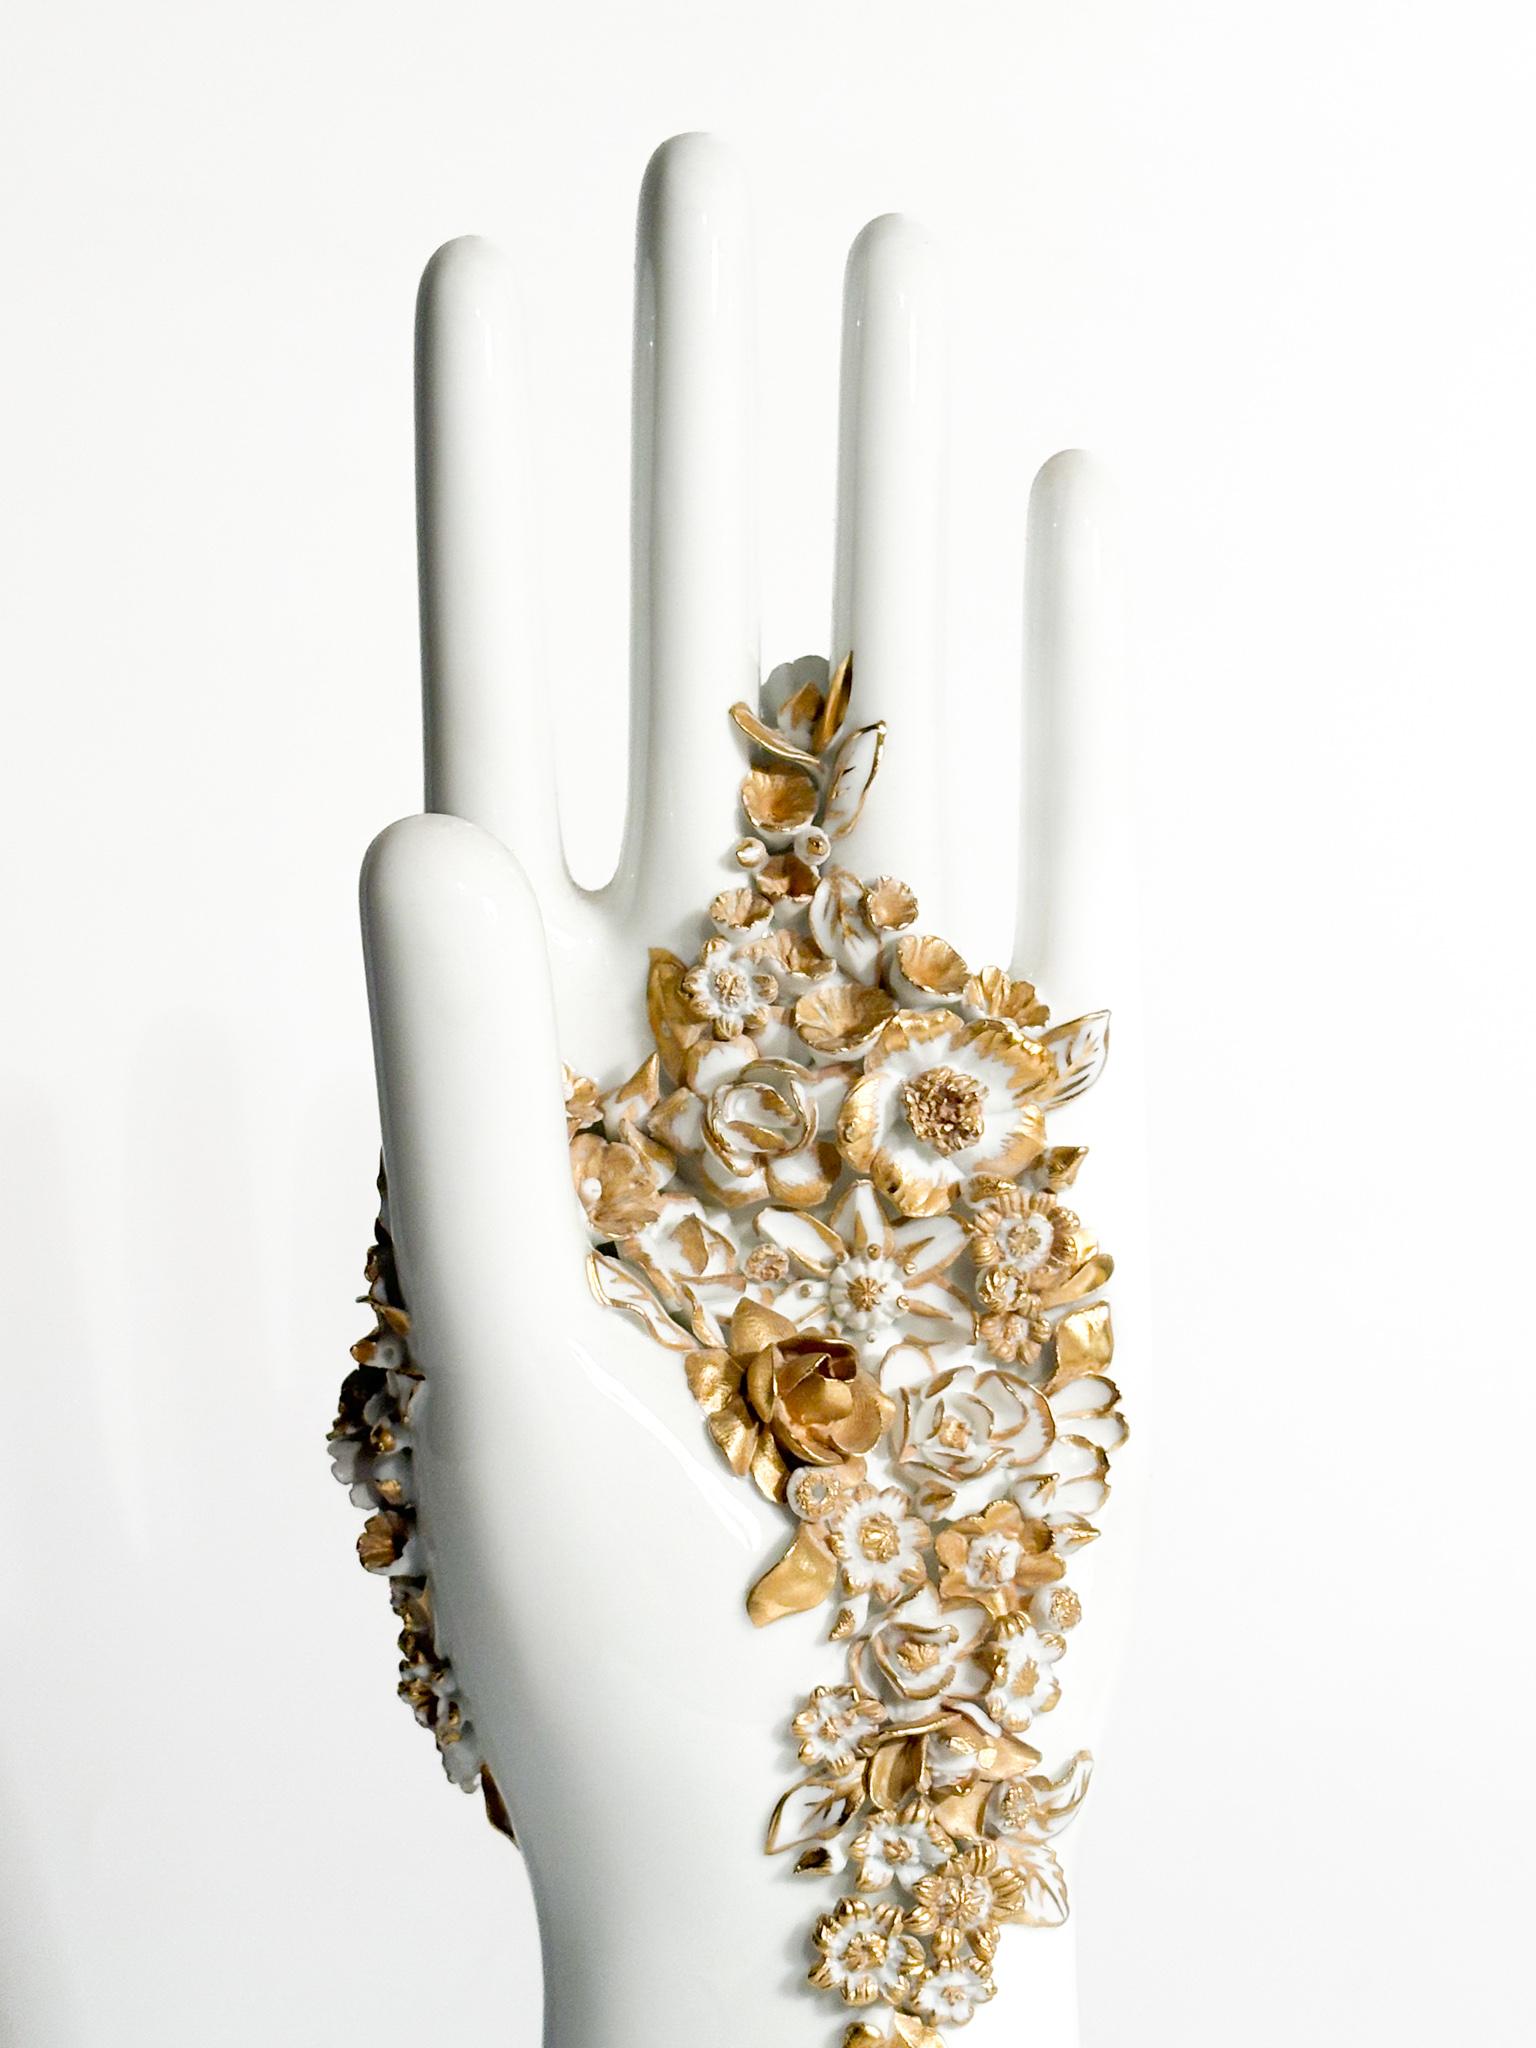 Porcelain Ponti White and Gold Flowered Hand Art by Gio Ponti for Richard Ginori 1980s For Sale